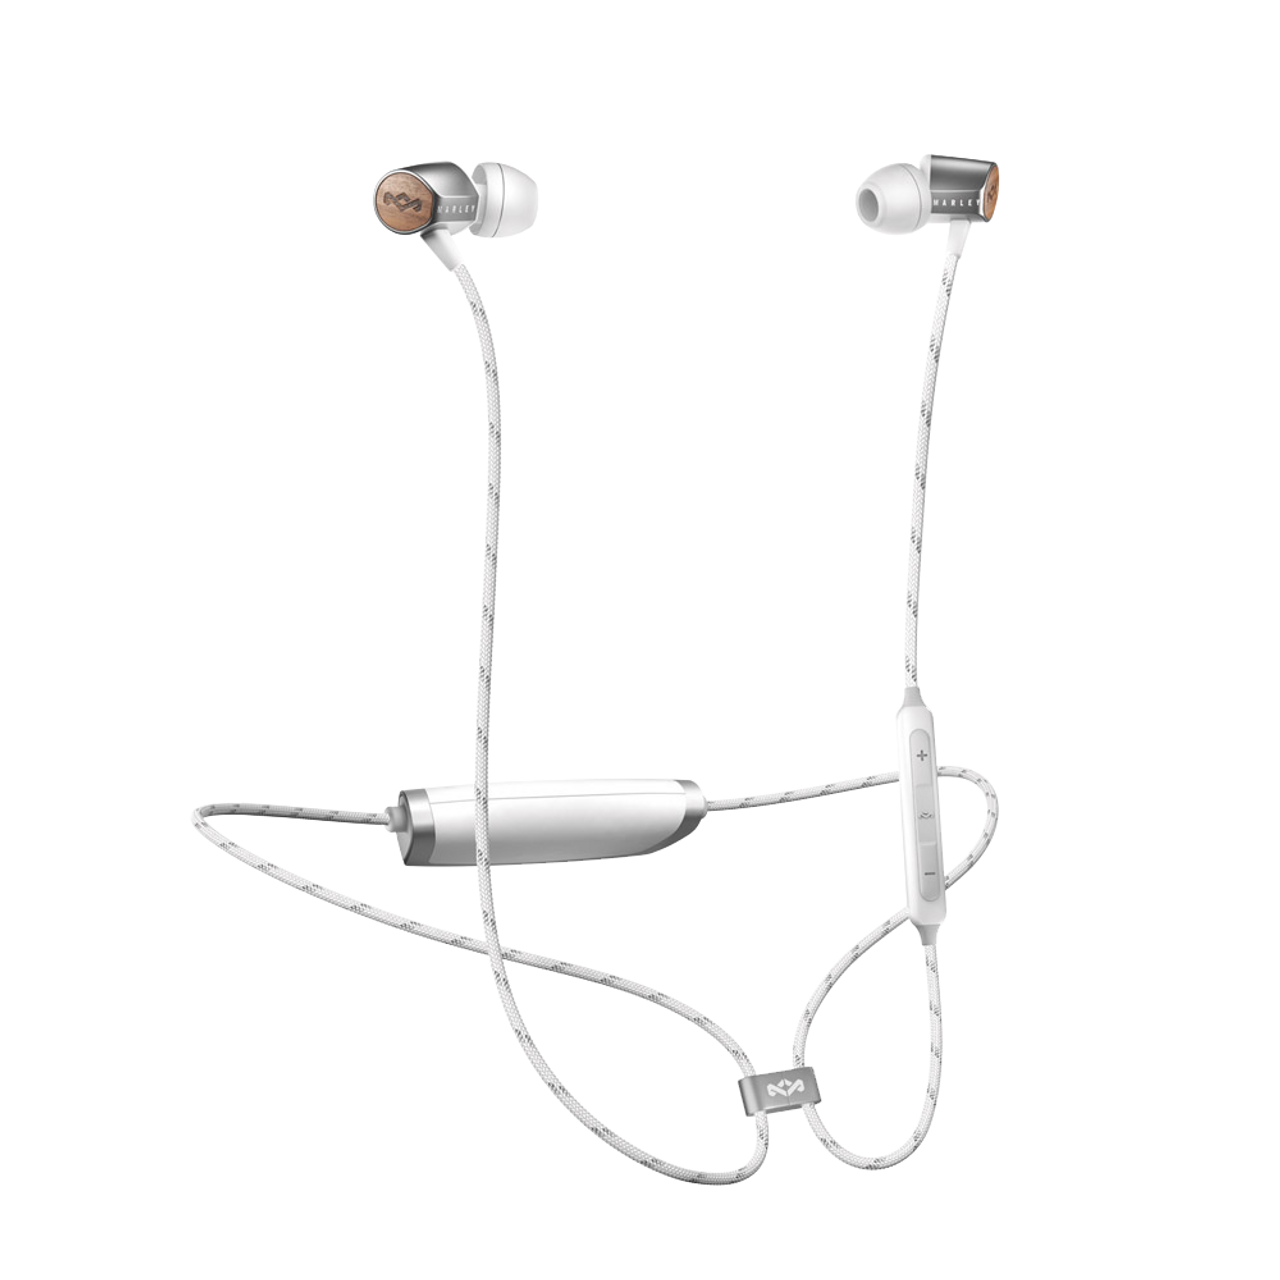 Wireless Bluetooth Headphones & Earbuds for Any Lifestyle